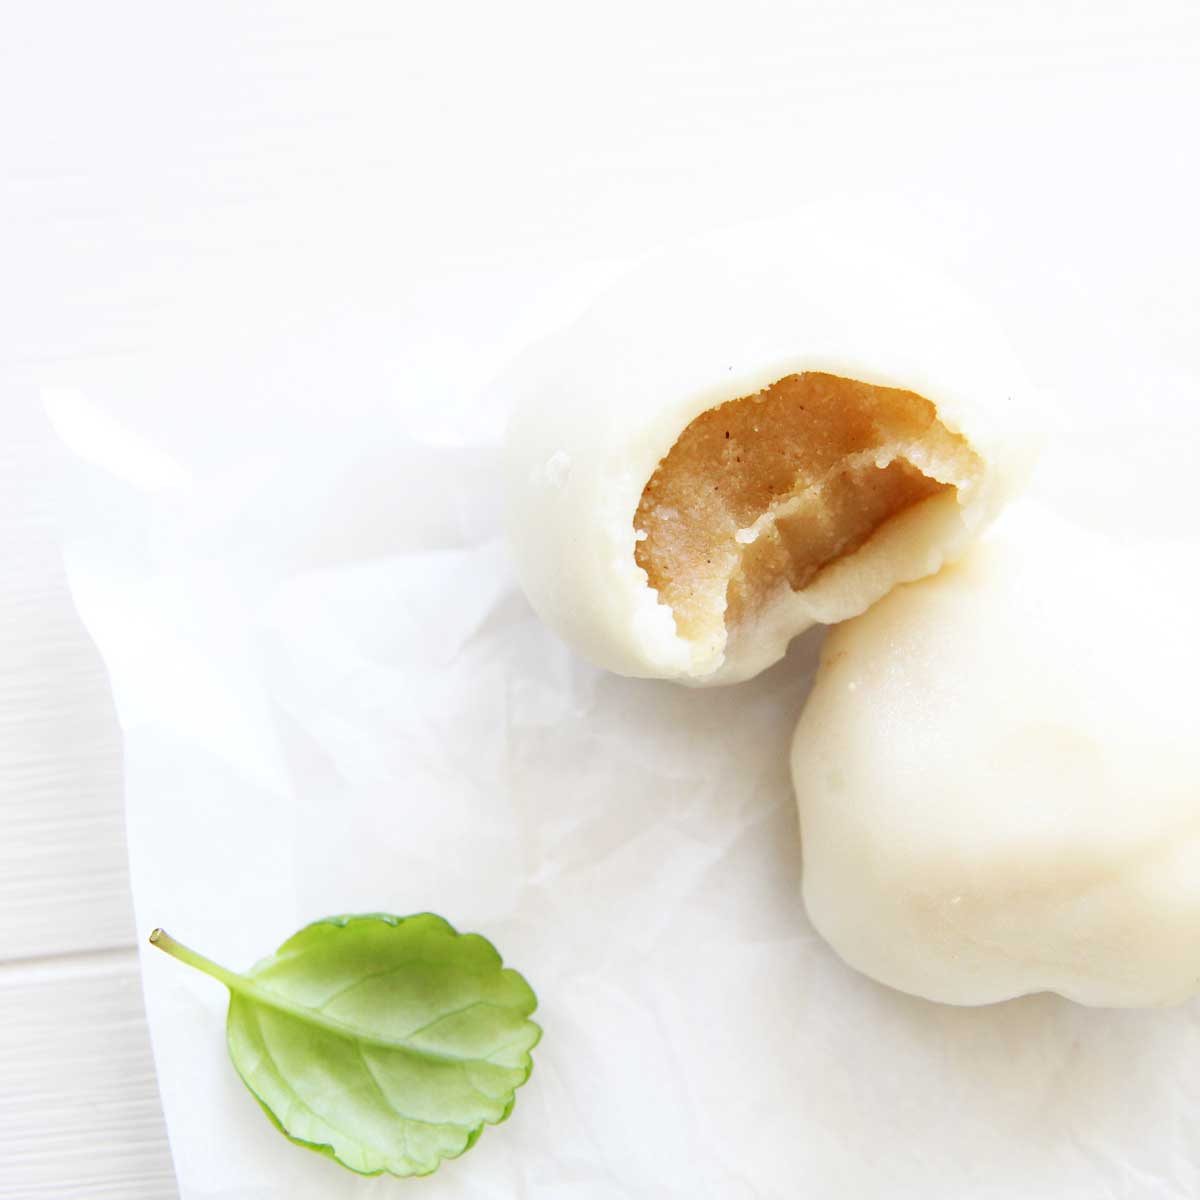 Savory Sweet Corn Mochi Made in the Microwave - Savory Sweet Corn Mochi